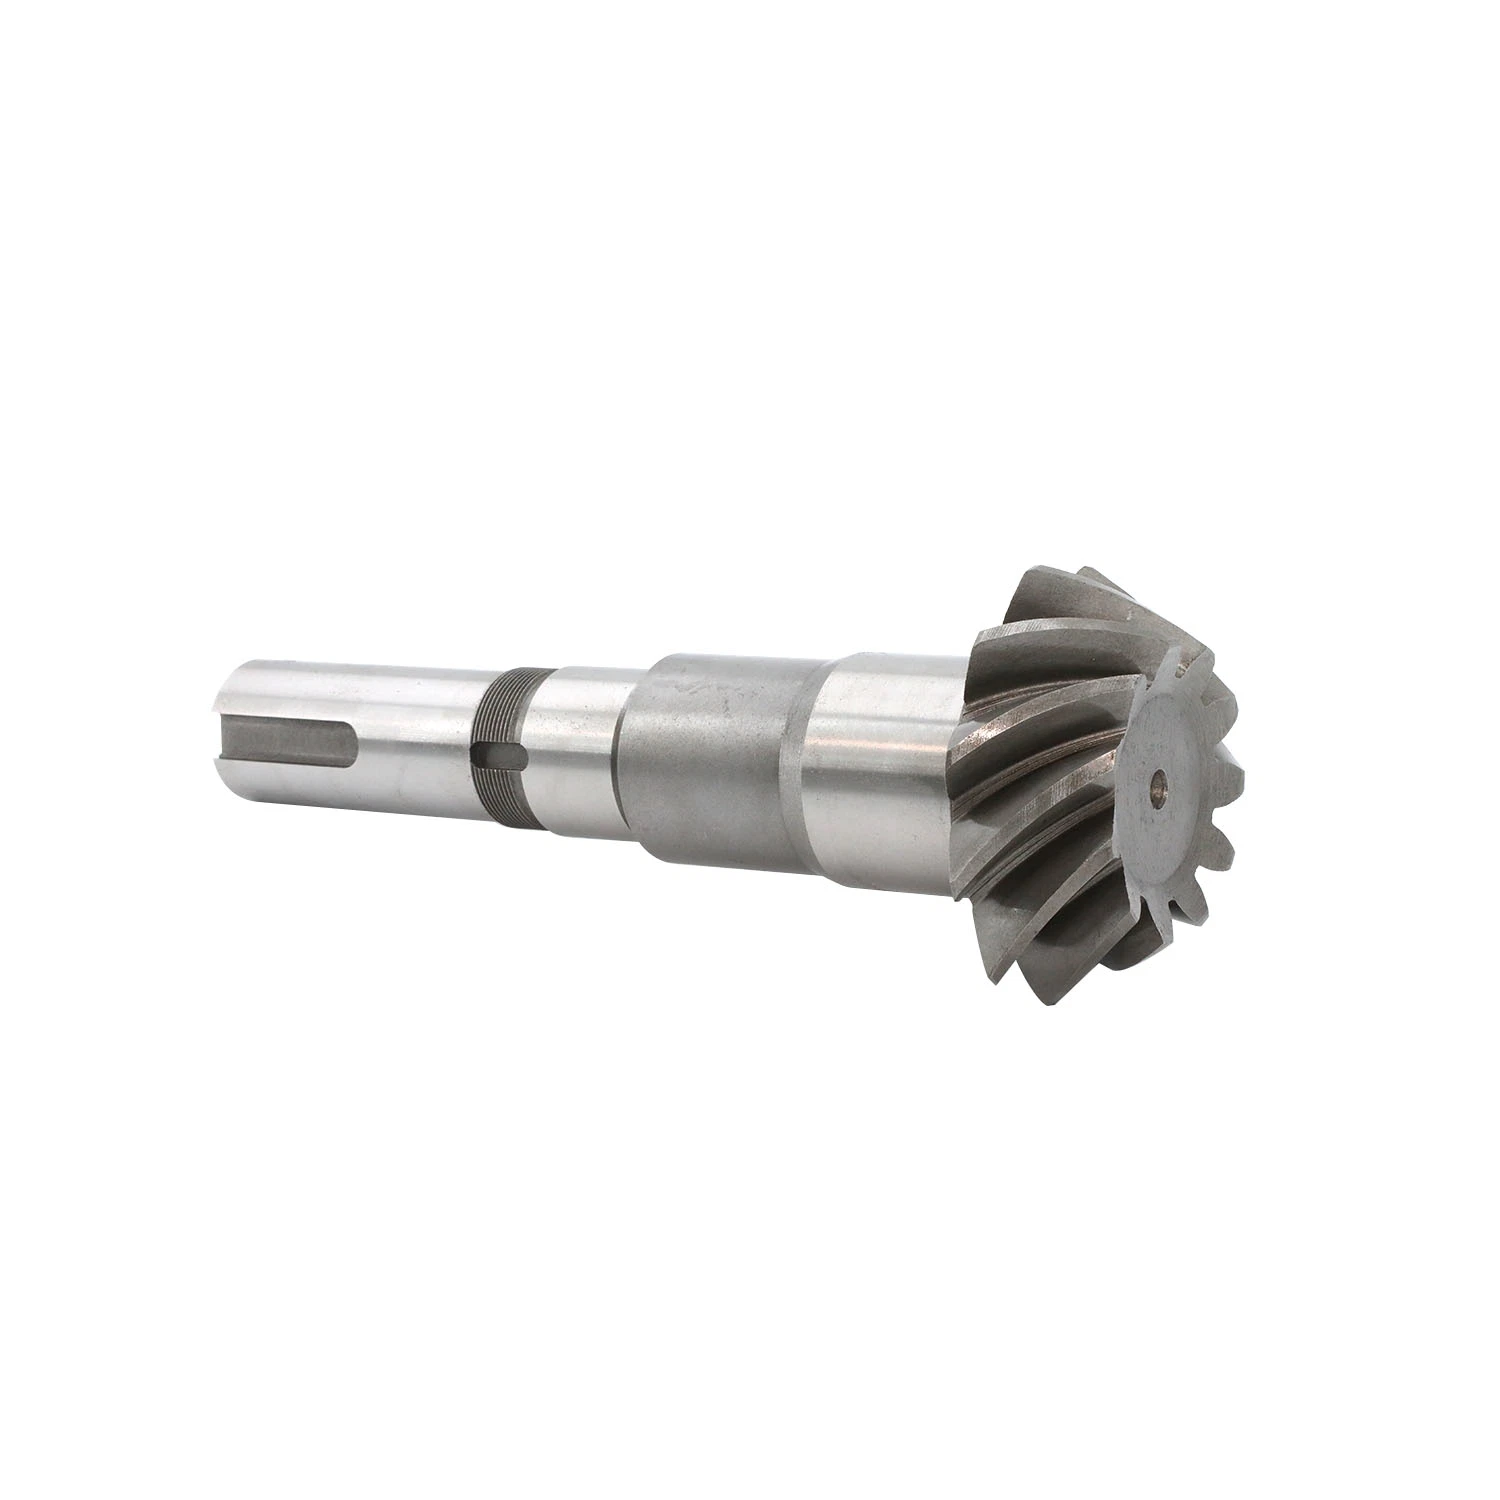 Reducer/Oil Drilling Rig/ Construction Machinery/ Truck/ Fan Equipment for Customized Gear Shaft Module 9 and 11 Teeth